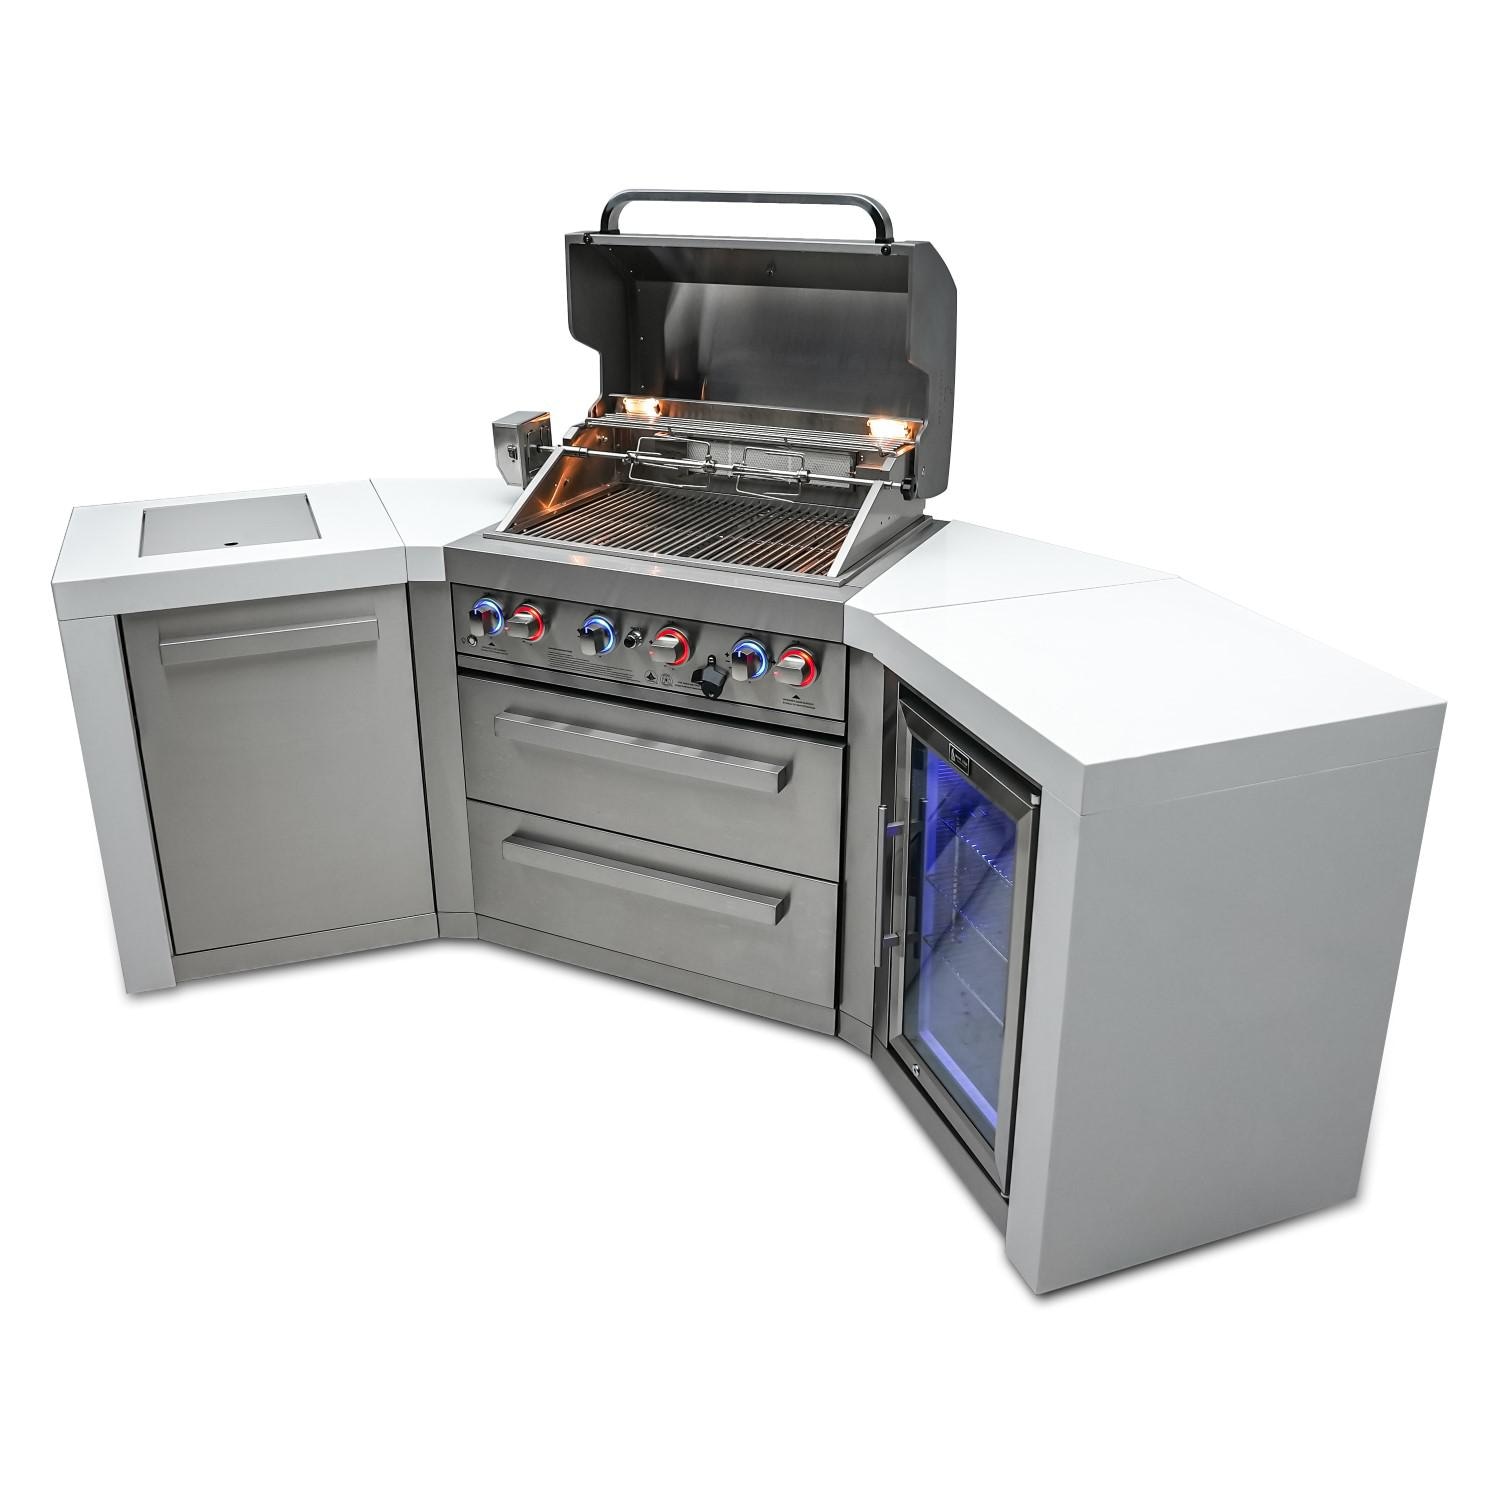 Mont Alpi 400 Deluxe 45 Degree Propane Gas Island Grill W/ Refrigerator Cabinet, Infrared Side Burner, & Rotisserie Kit - MAi400-D45FC - image 3 of 6